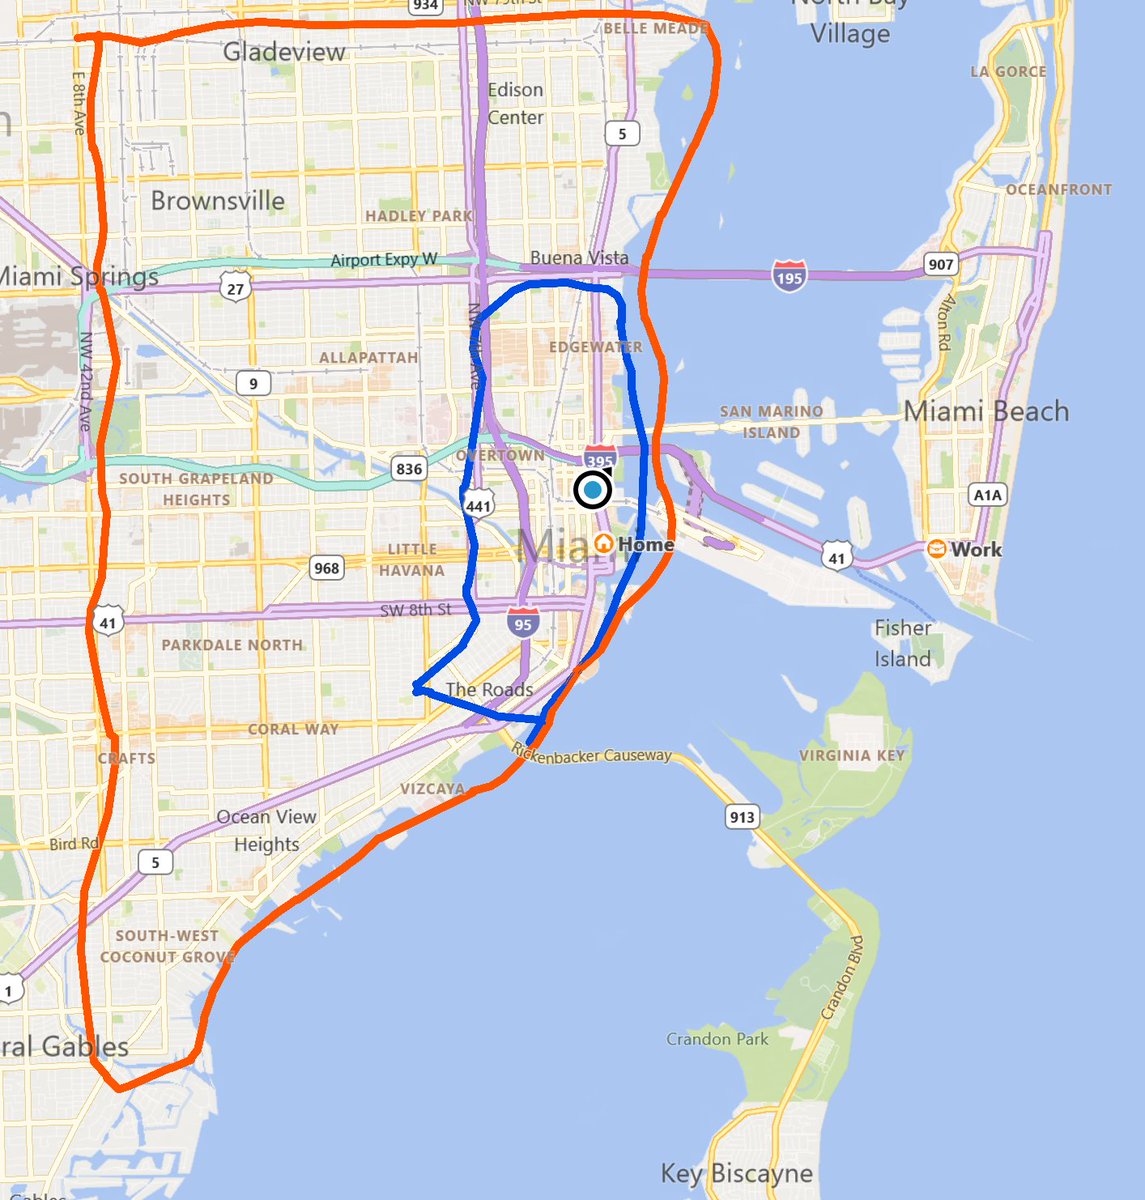 Thread: Thinking about moving to *Downtown*  #Miami ?Here is *my* unofficial quick guide to the neighborhoods of  @downtownMIA First: The "City of Miami" is HUGE (red outlined area + more.) "Downtown" is the area outlined in blue1/x @MiamiMayor  @shervin  @bunsen